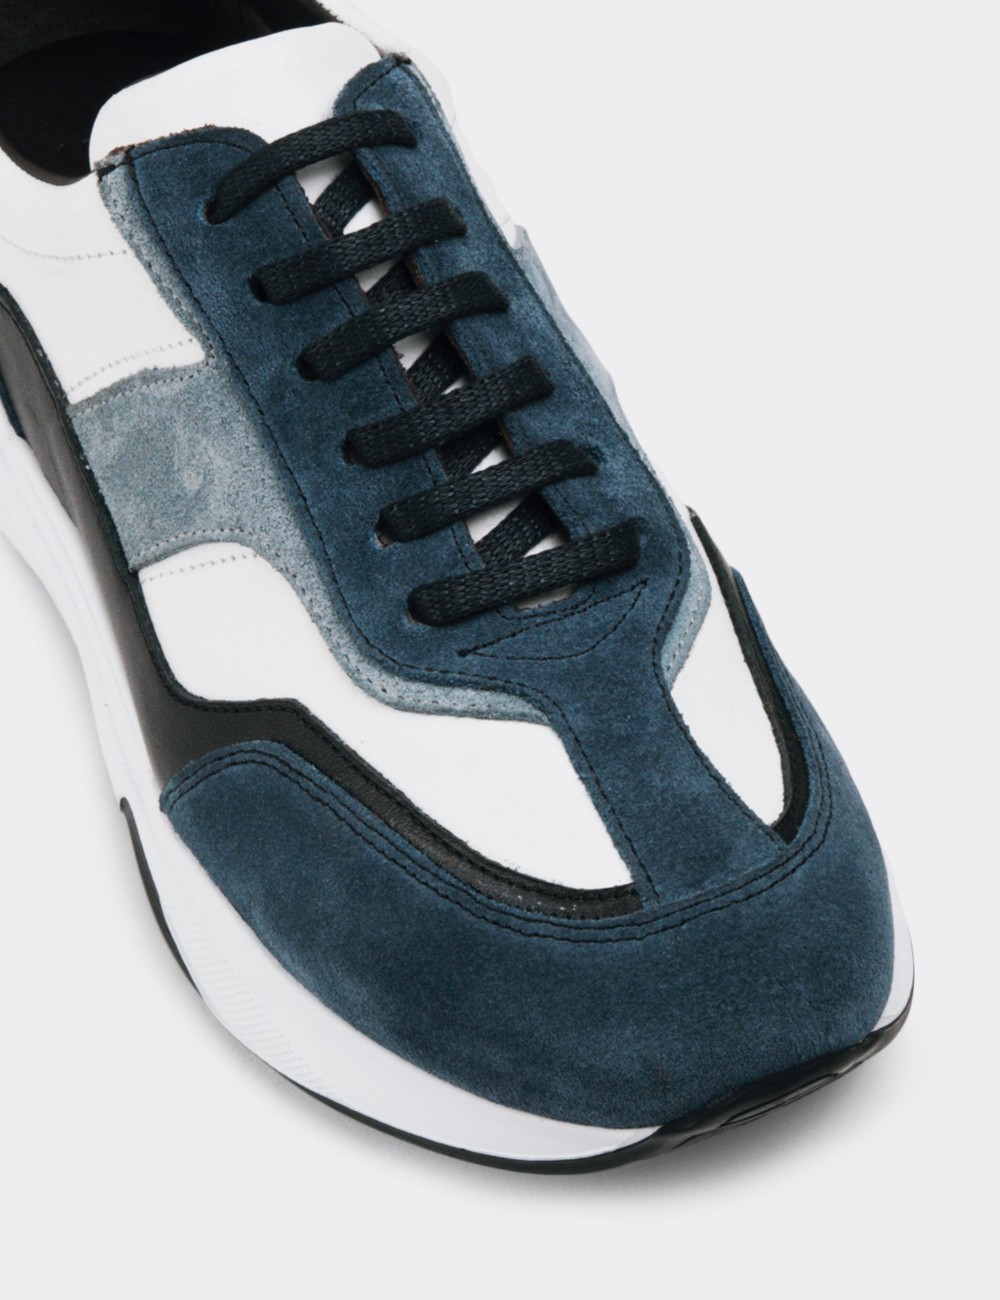 Blue Suede Leather Sneakers - 01890ZMVIE01